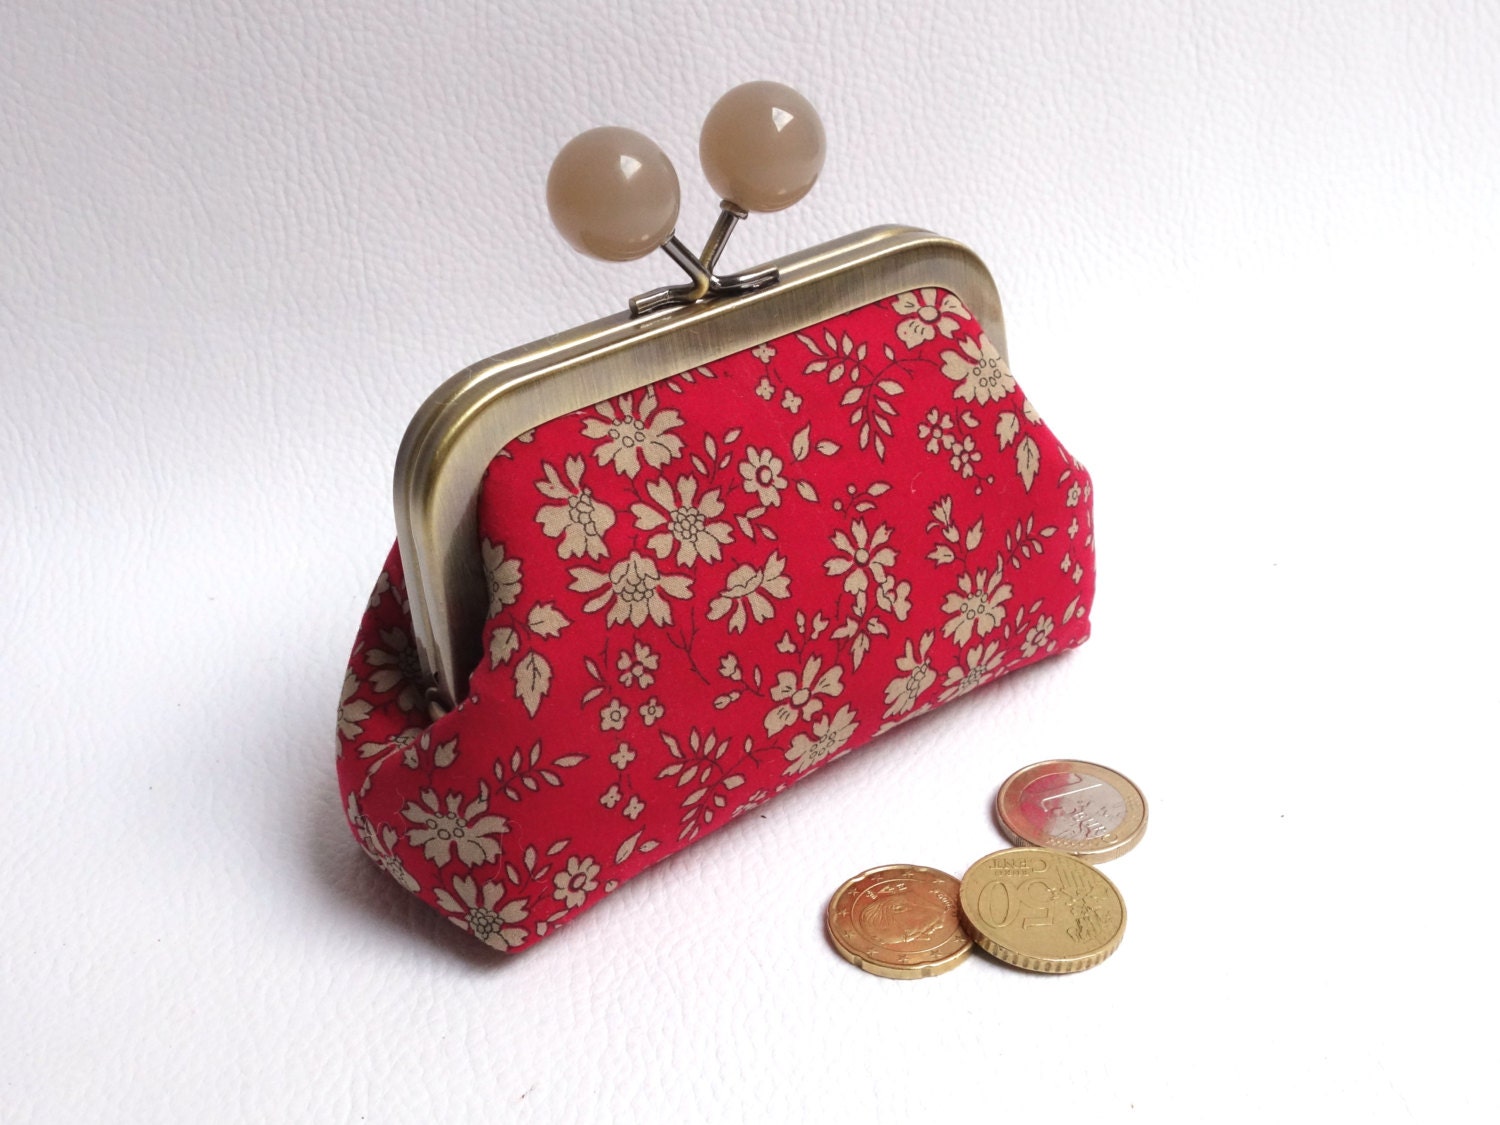 Metal frame pouch / Coin purse with clasp / Small kiss lock